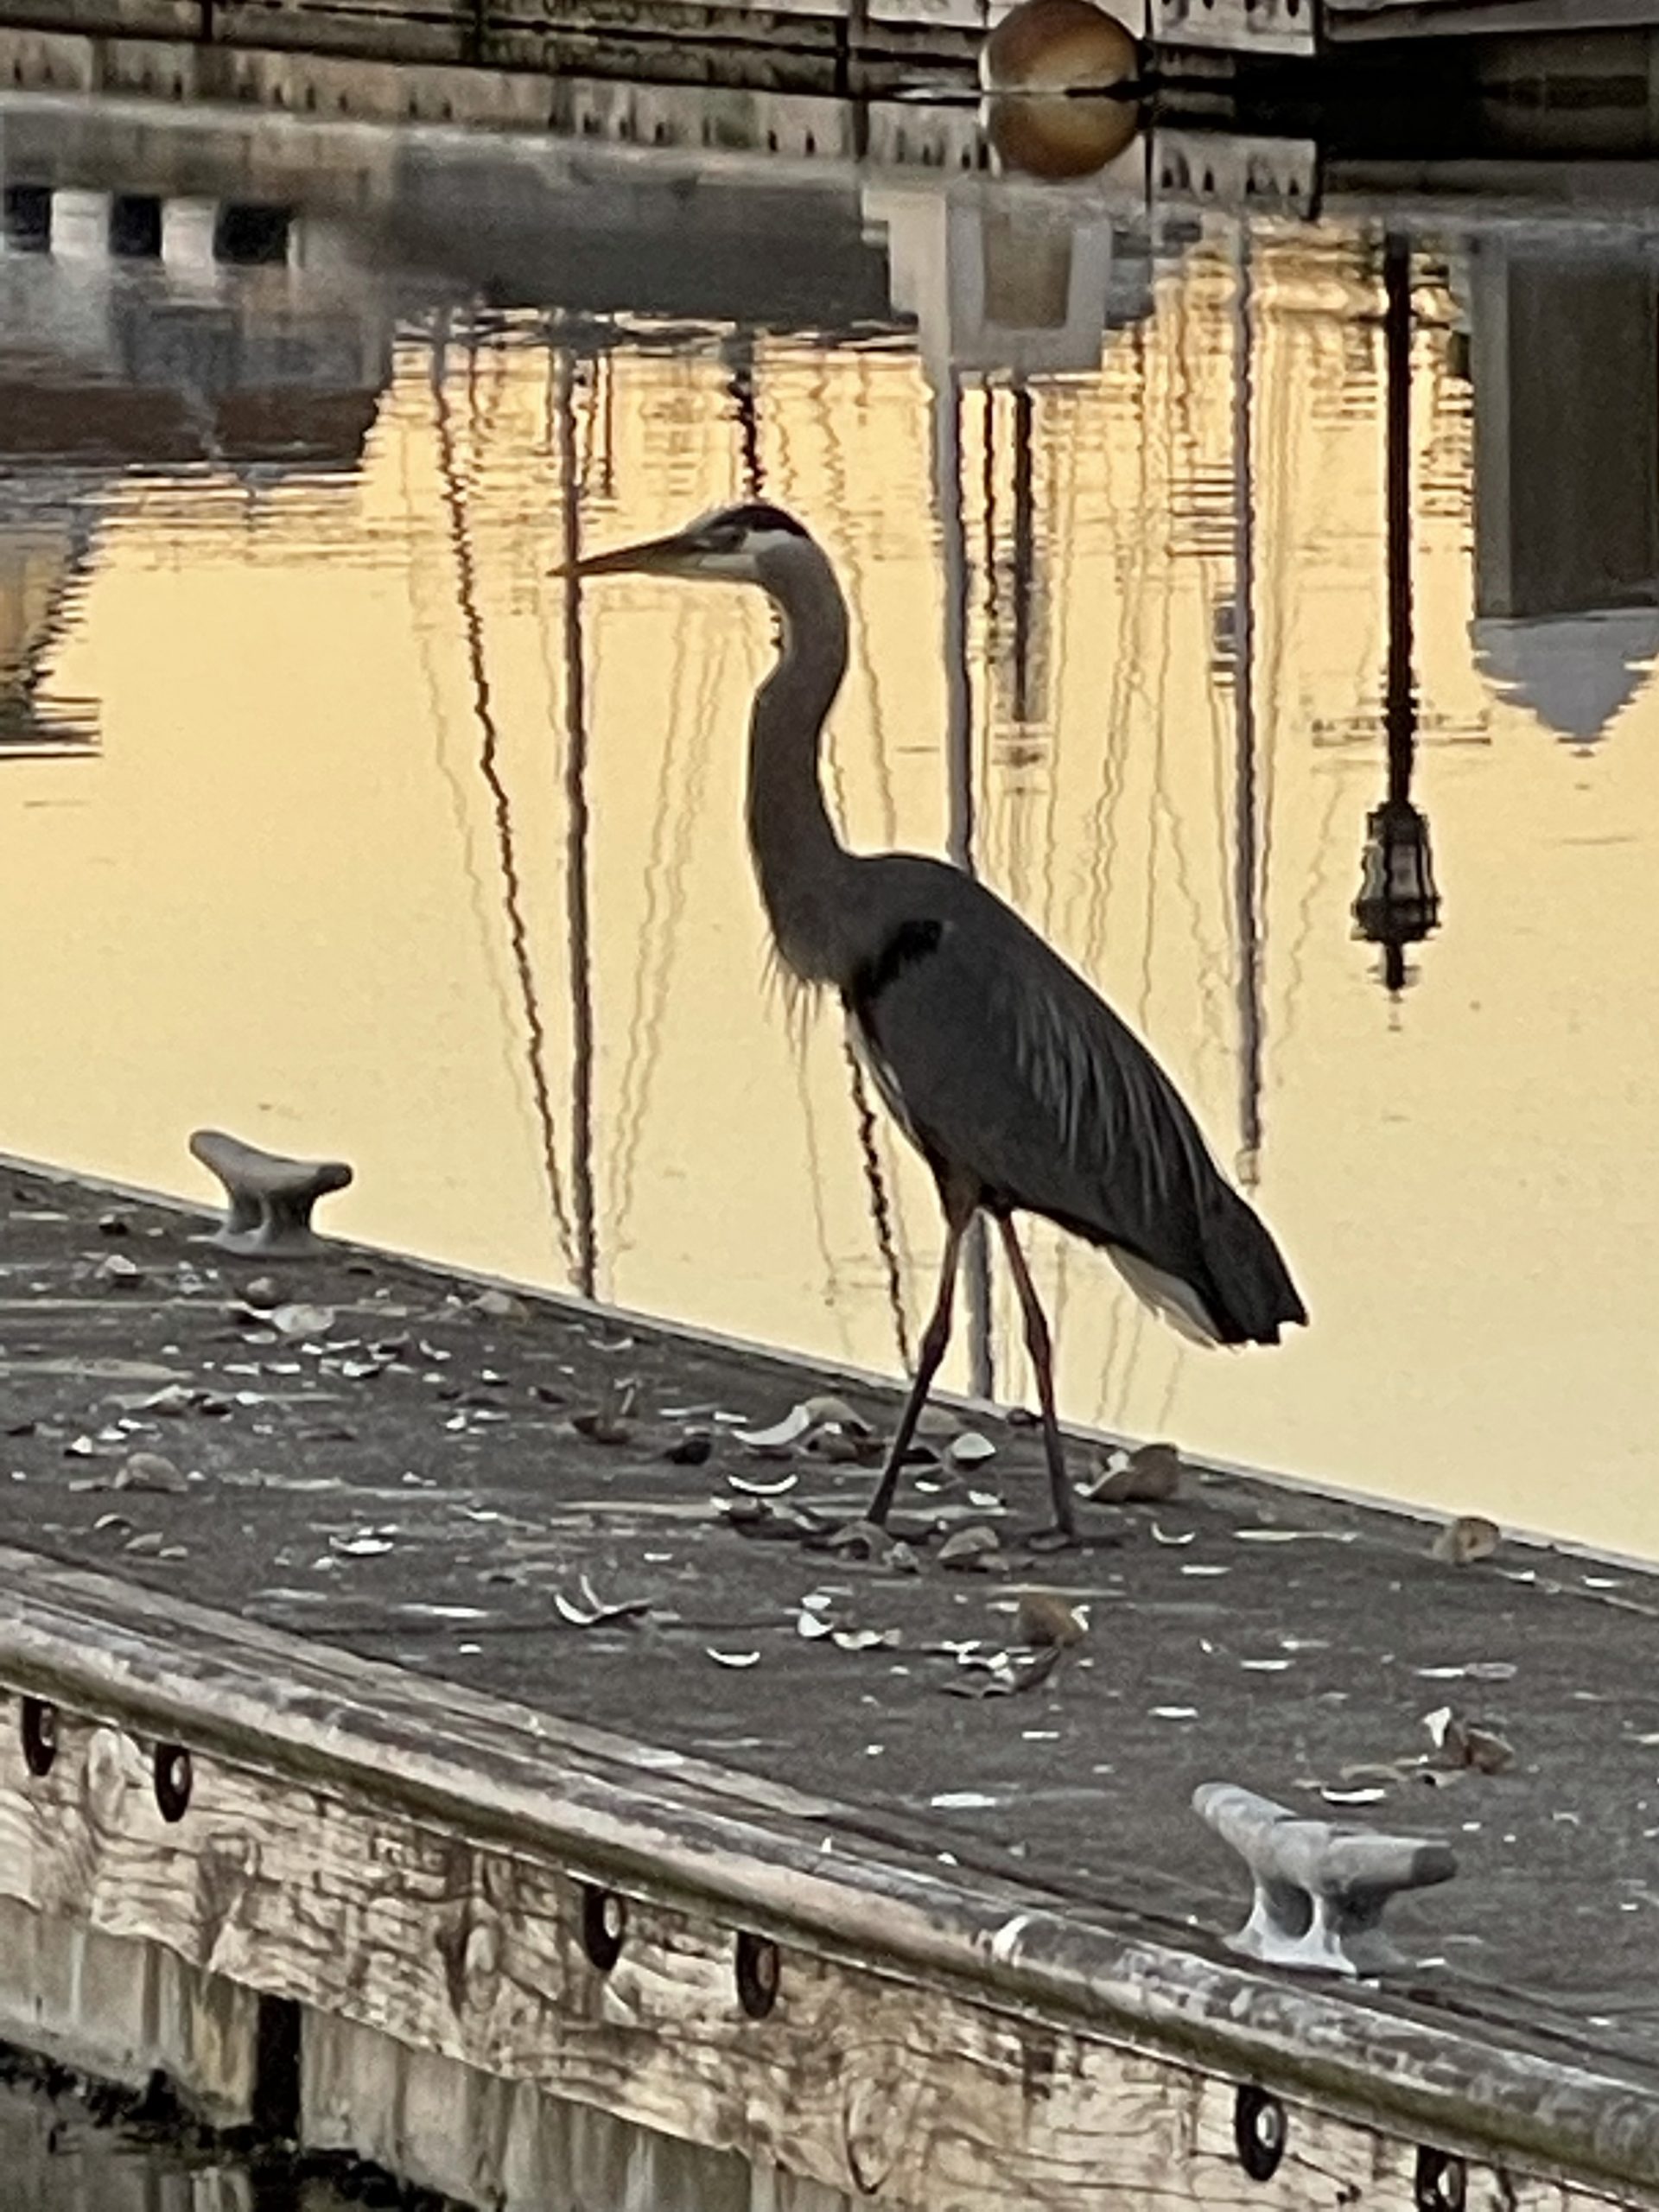 Our neighbor on the dock is a gray heron